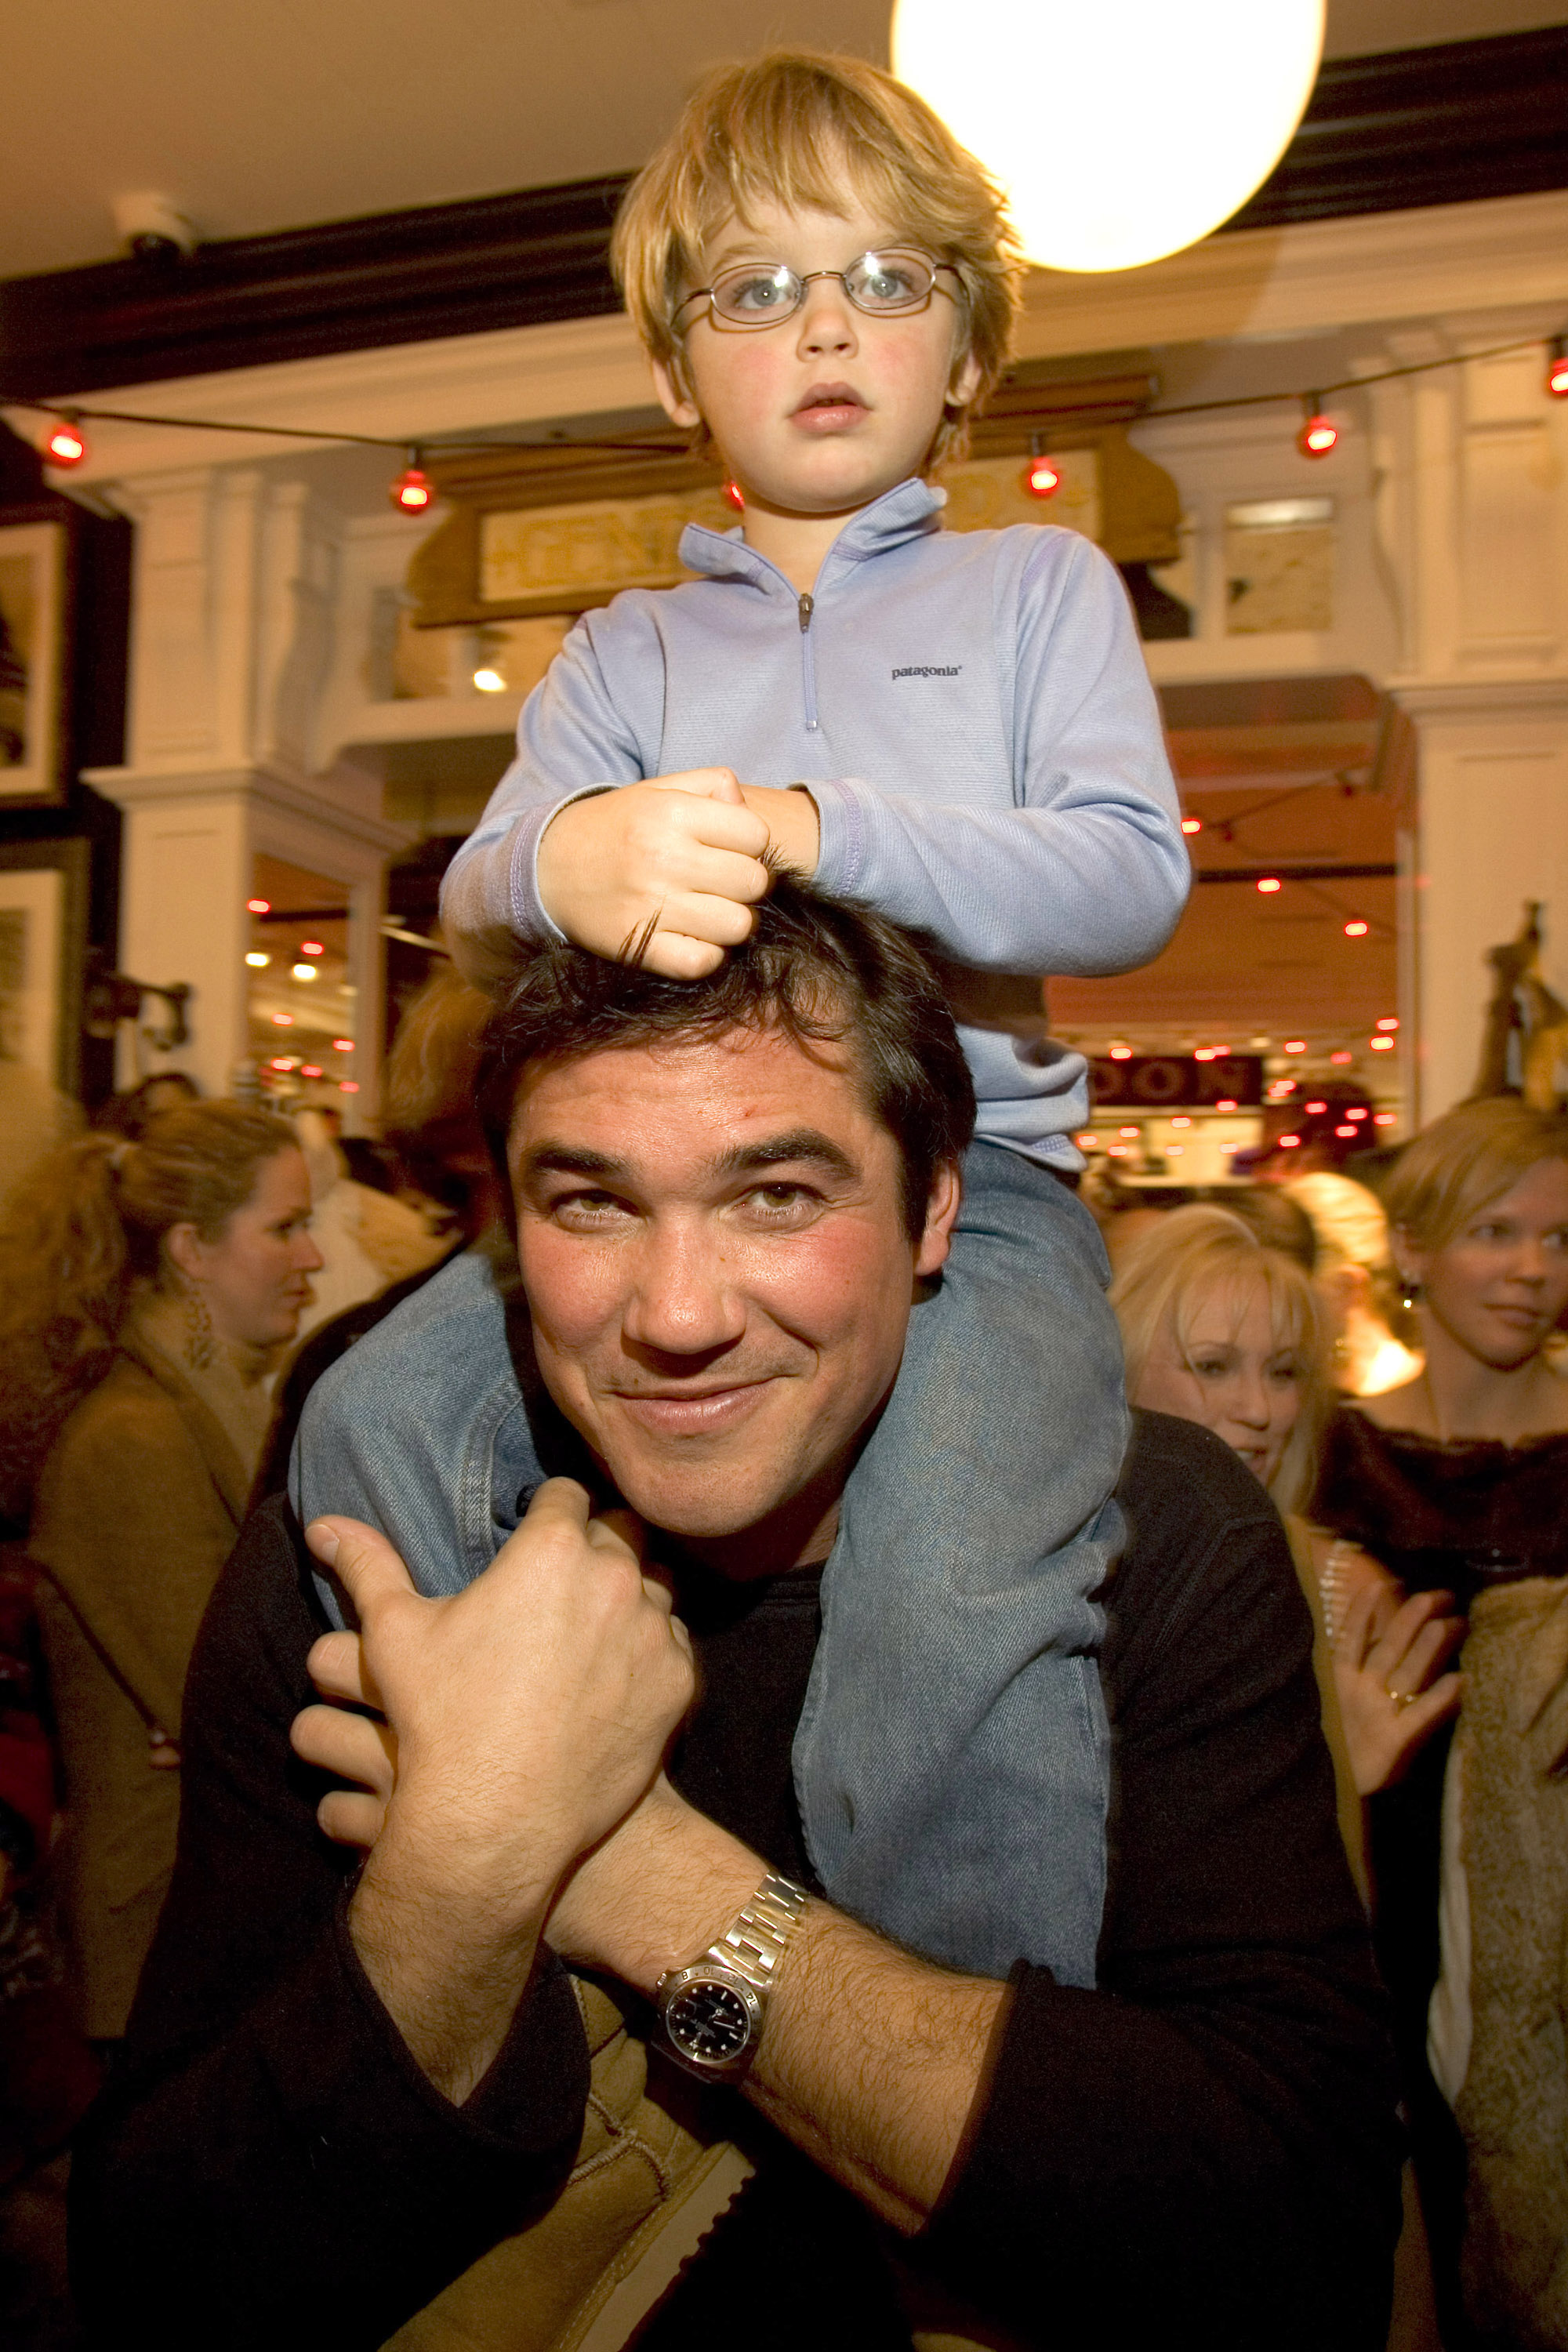 Christopher Cain and Dean Cain during Aspen Peak at the Opening of The New Ralph Lauren Aspen Store at The New Ralph Lauren store in Aspen, Colorado, United States circa December 2004. | Source: Getty Images